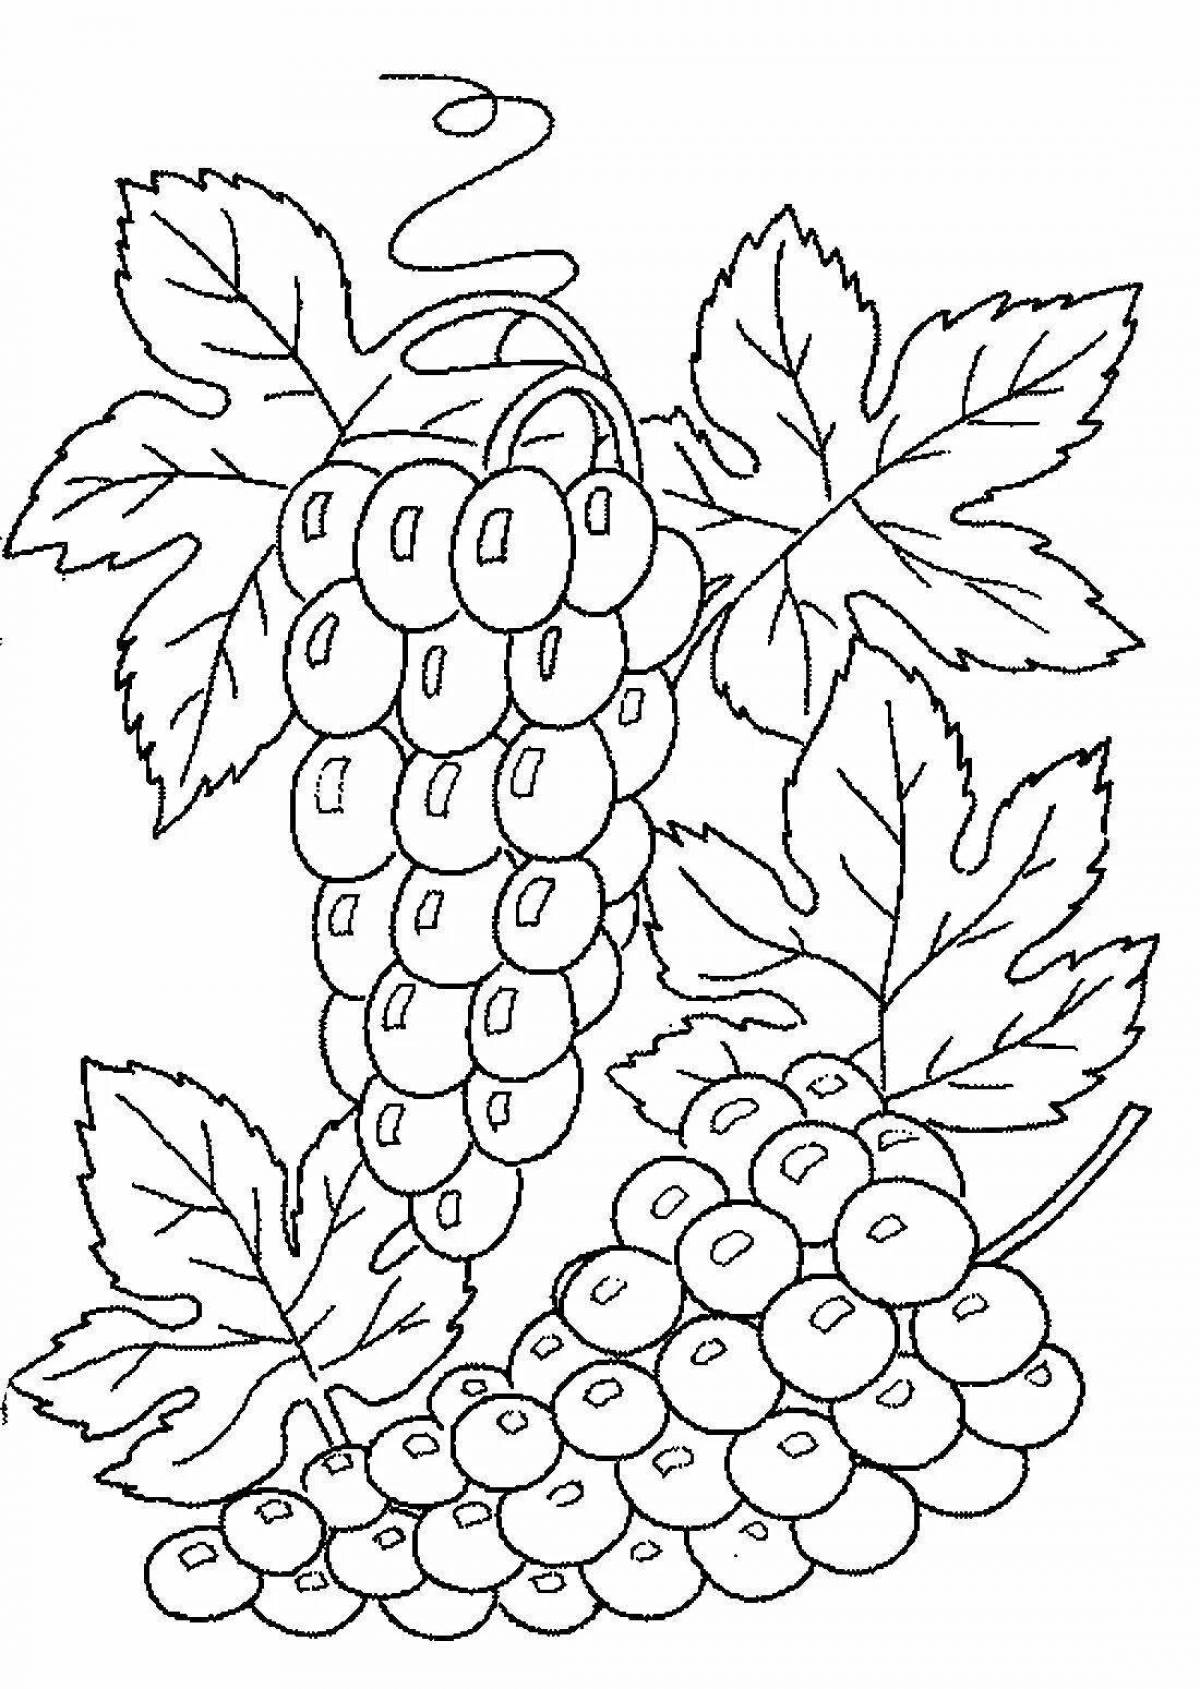 Amazing grape coloring page for kids